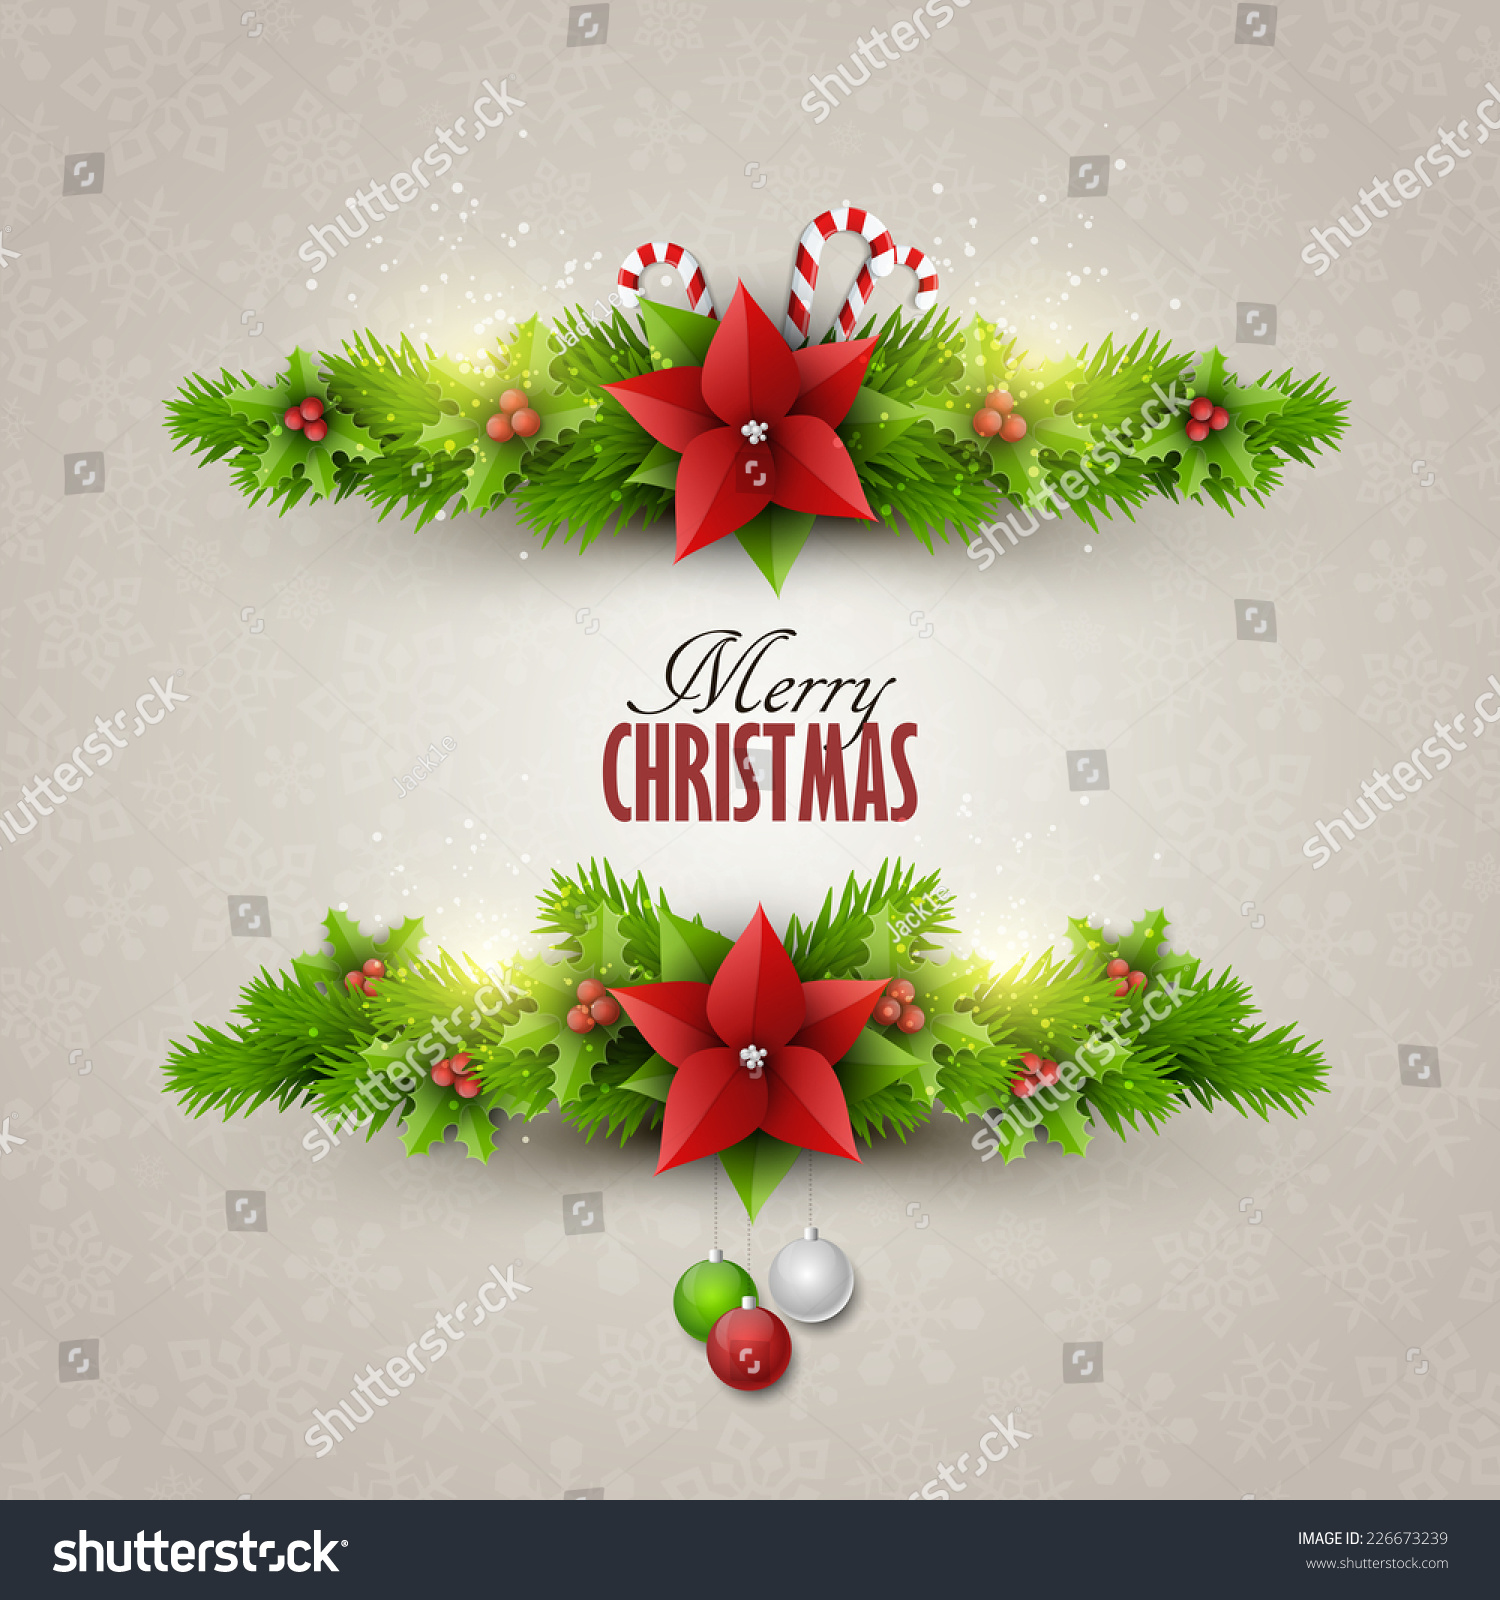 Christmas card with fir twigs and decoration elements #226673239